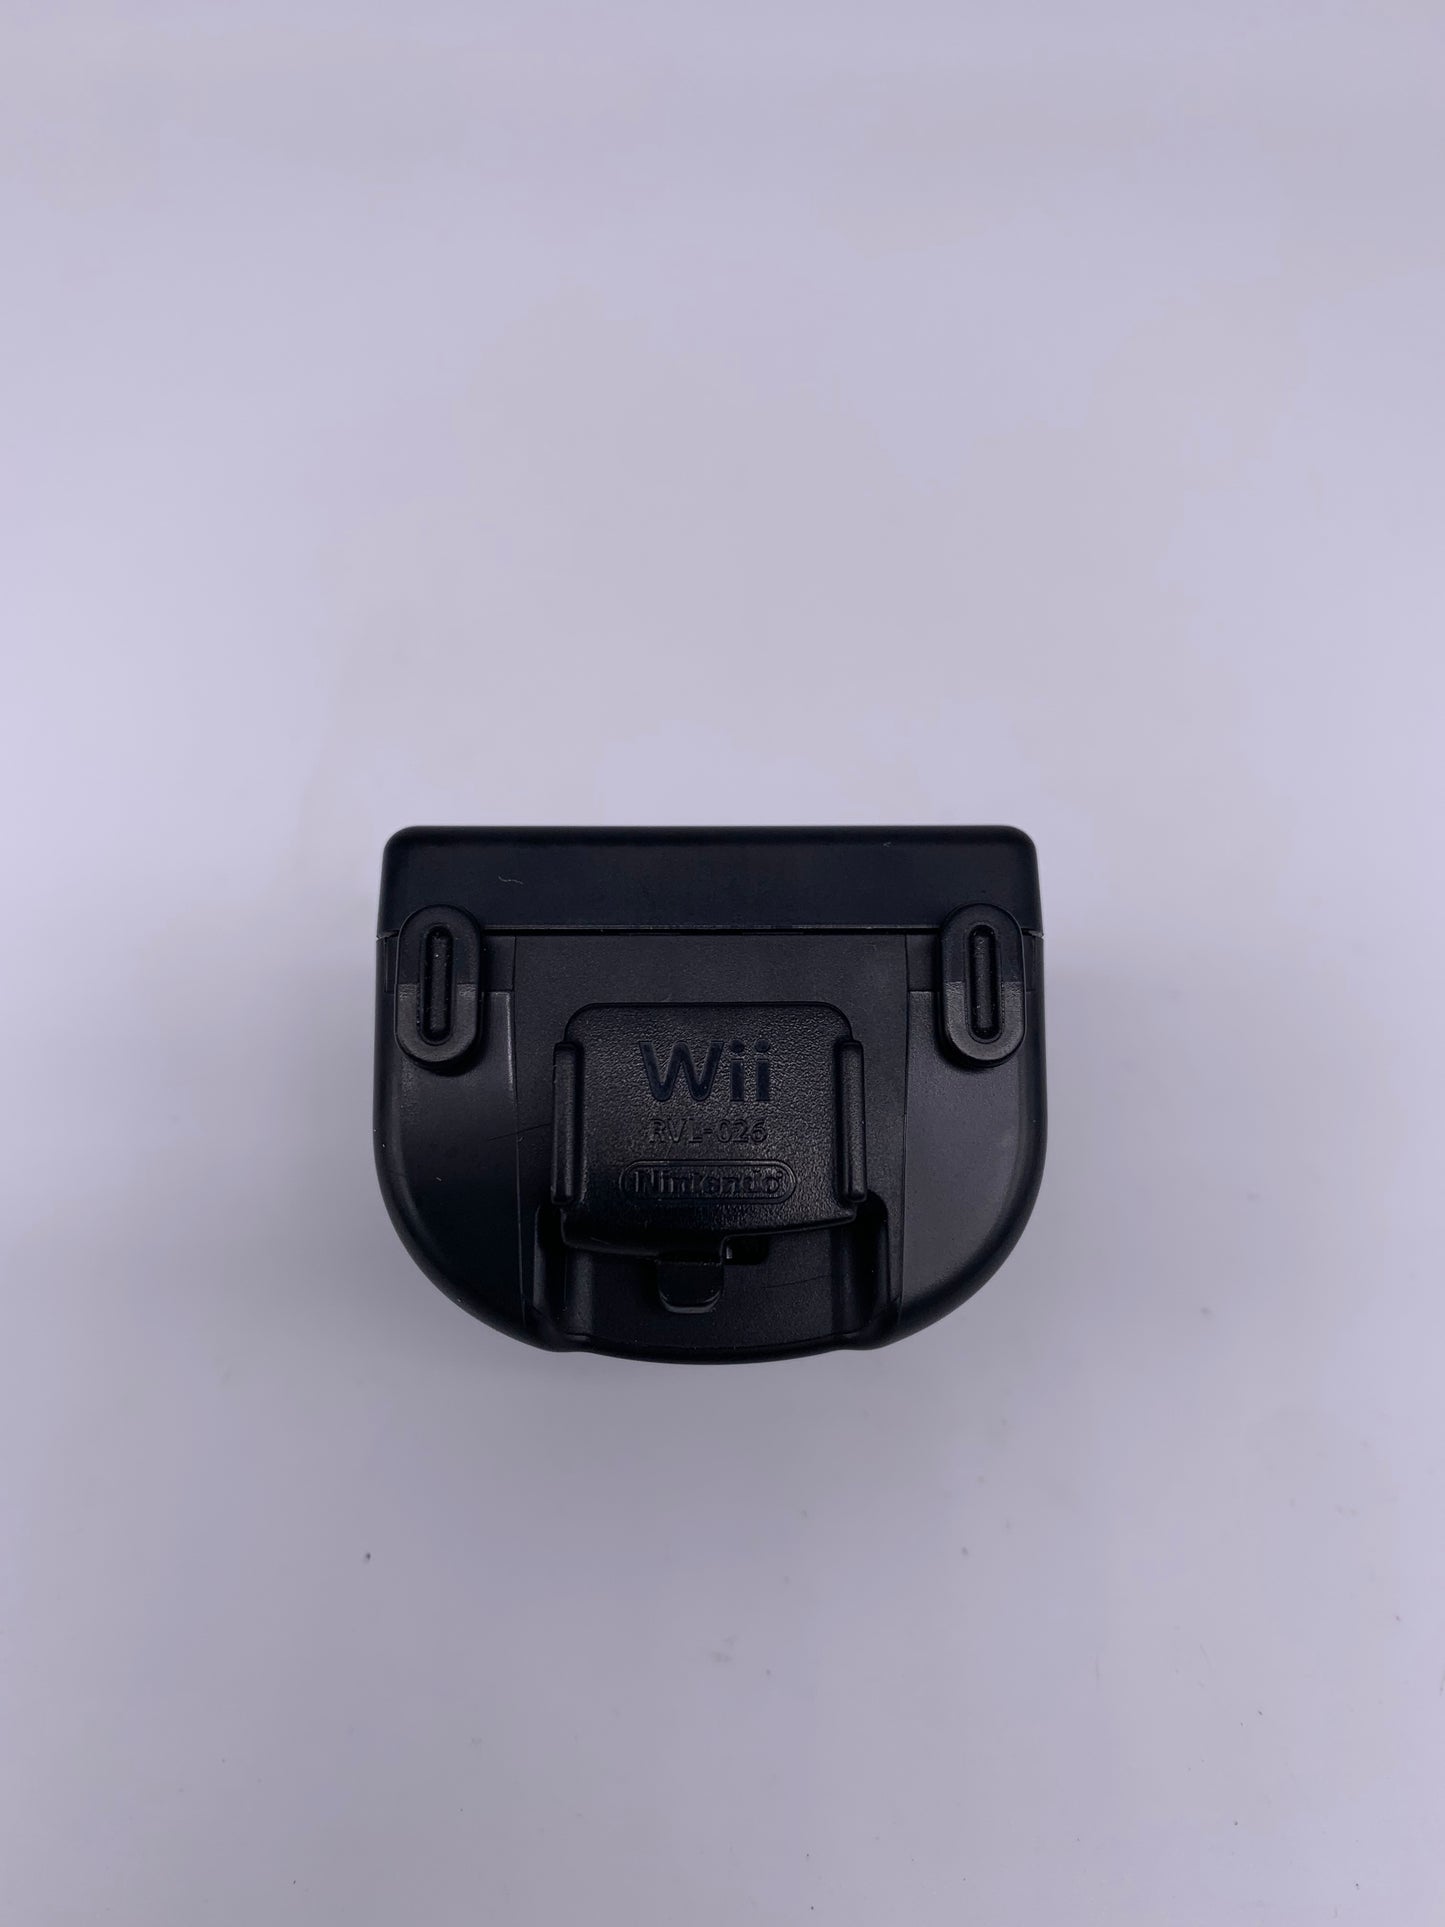 NiNTENDO Wii | OFFiCIAL WiiMOTiON CONTROLLER ADAPTER BLACK | RVL-026